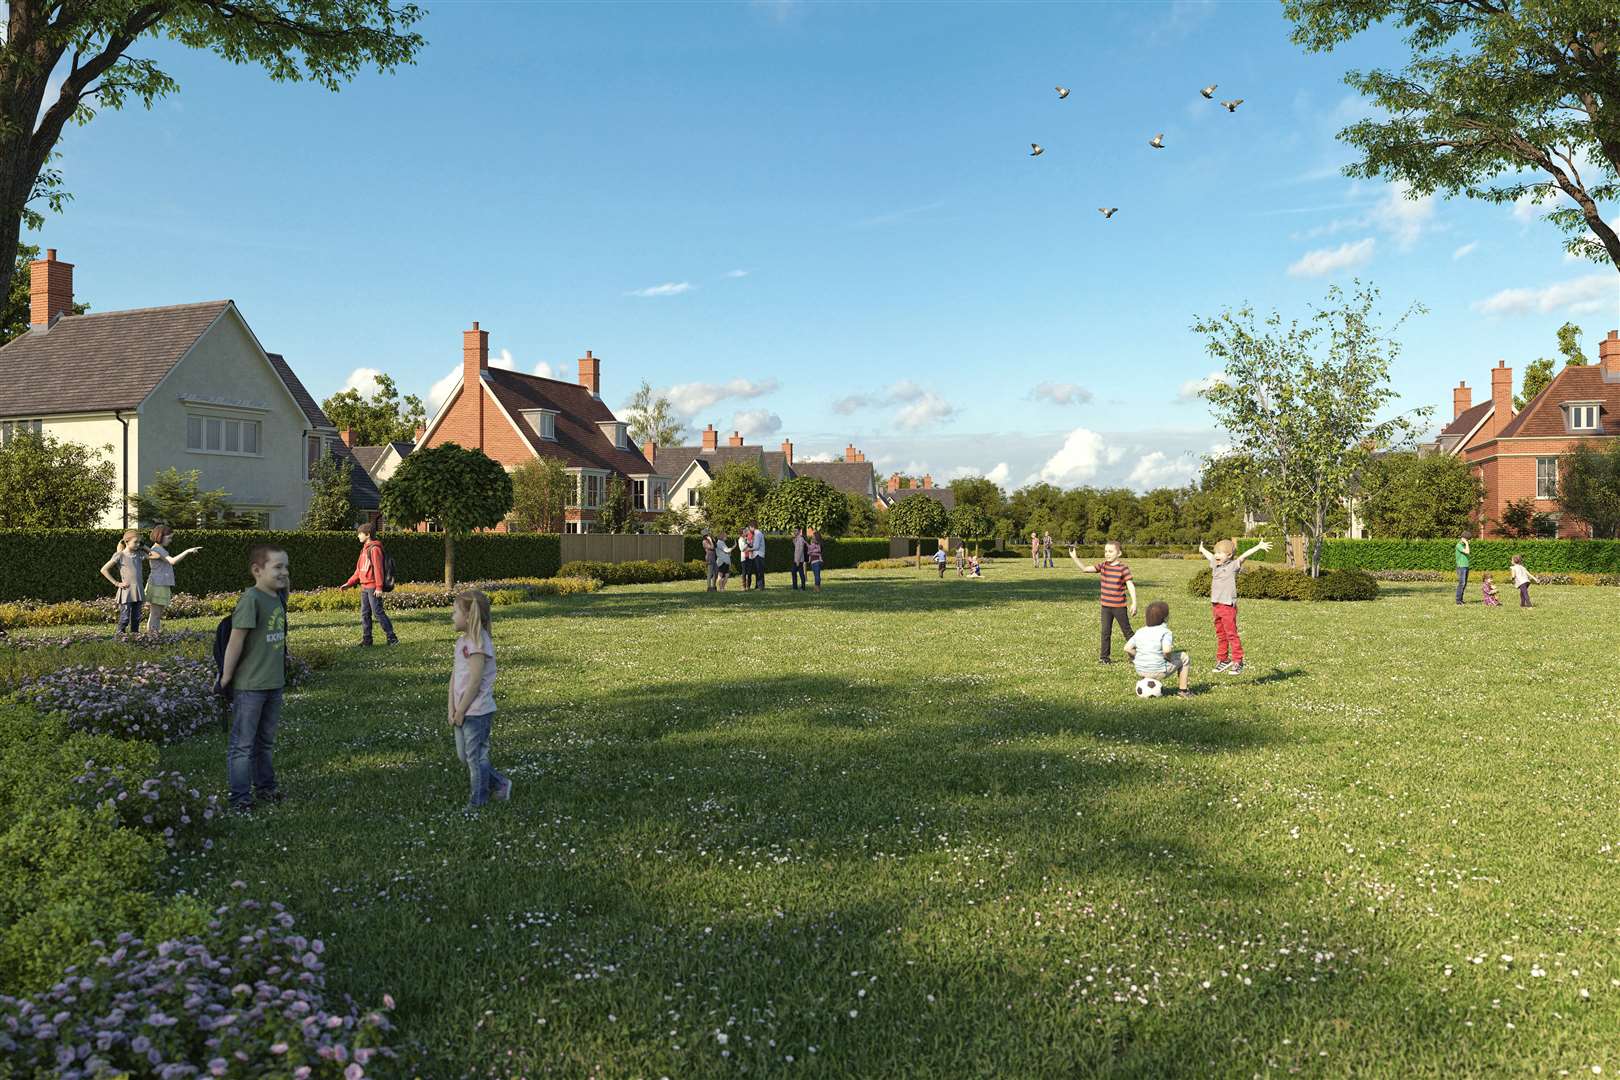 Quinn Estates has promised large areas of green space